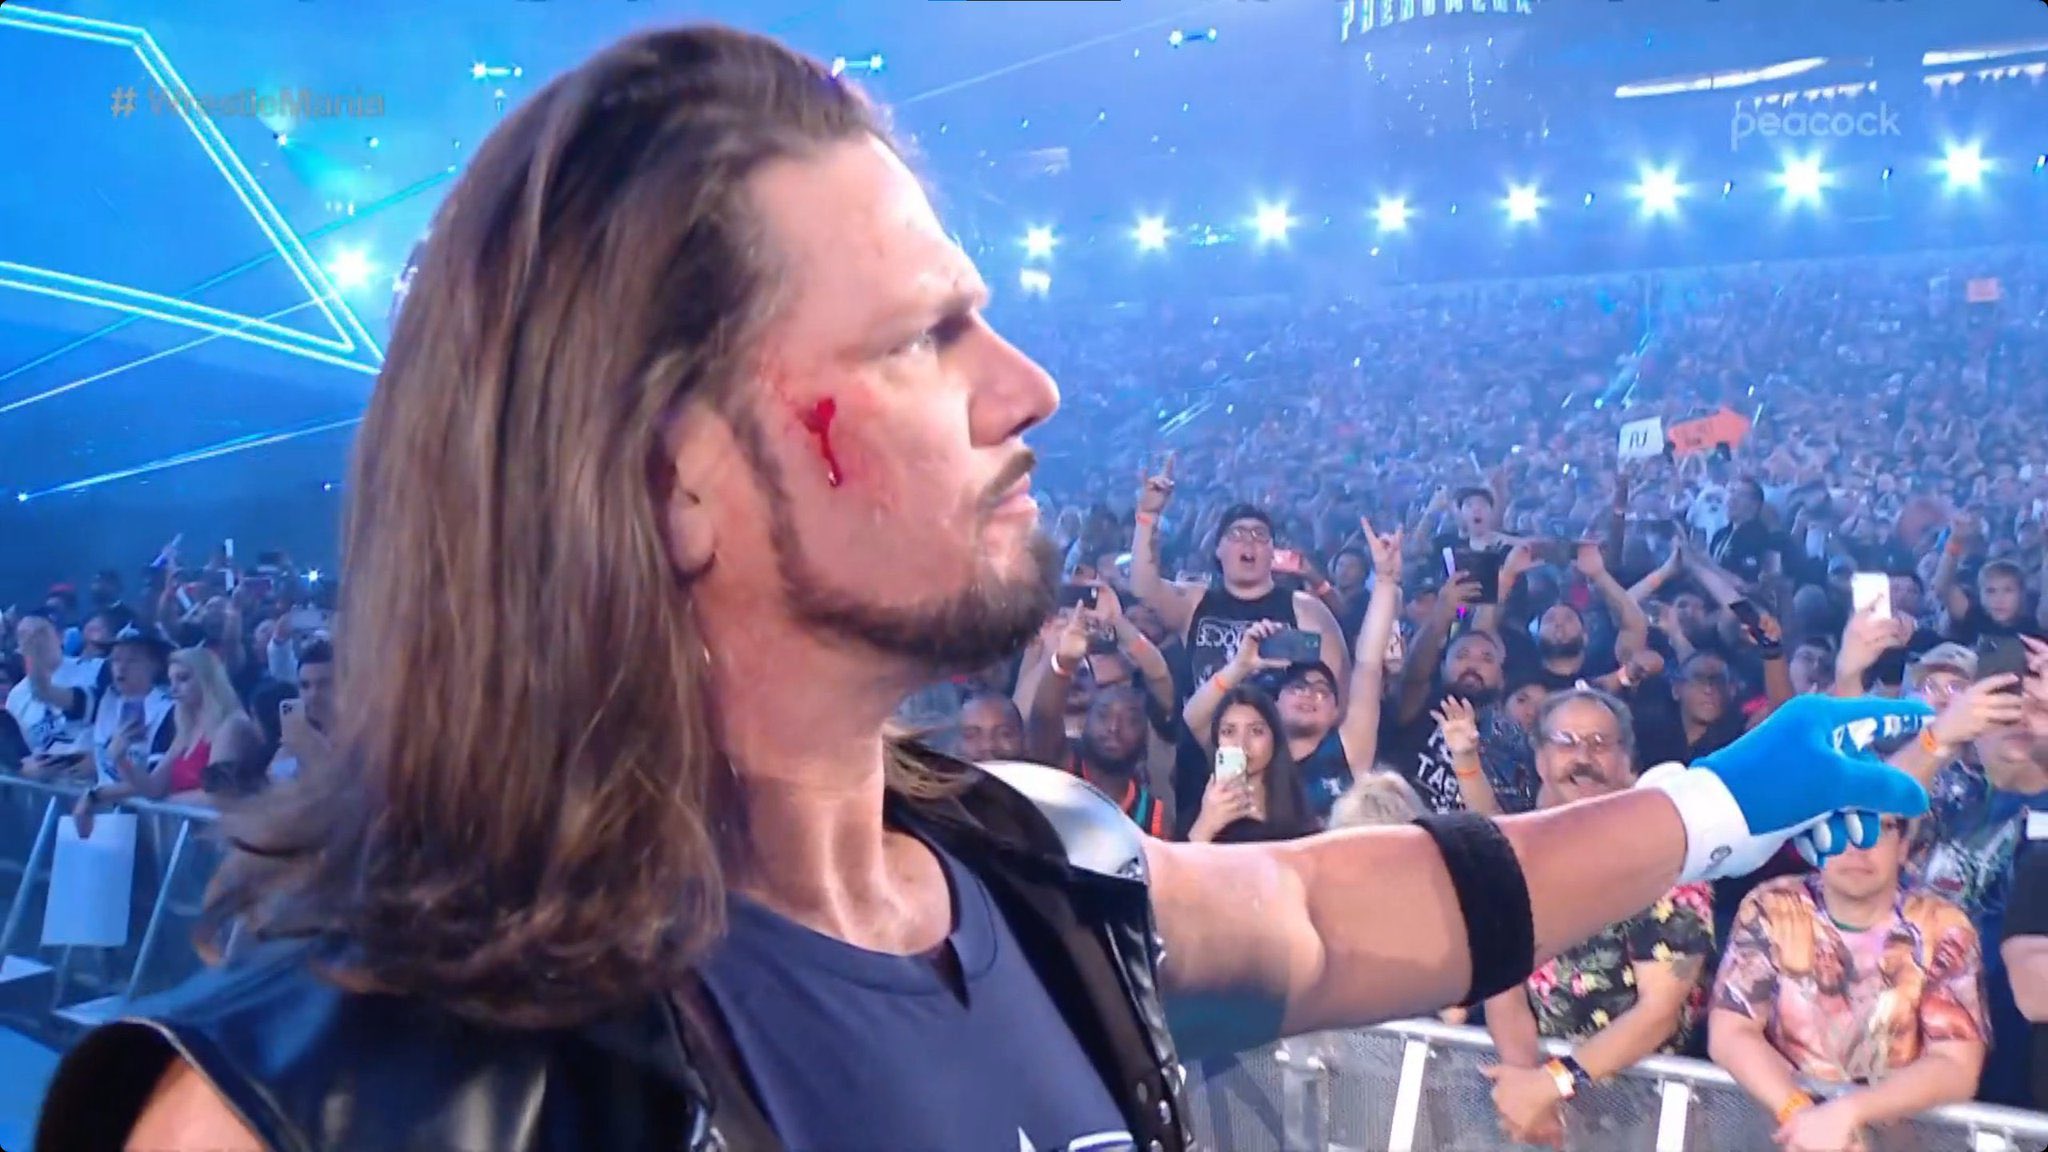 Nils Suling Styles blutet vorm Kampf! AJ Styles is bleeding his match! What happened? #Wrestlemania